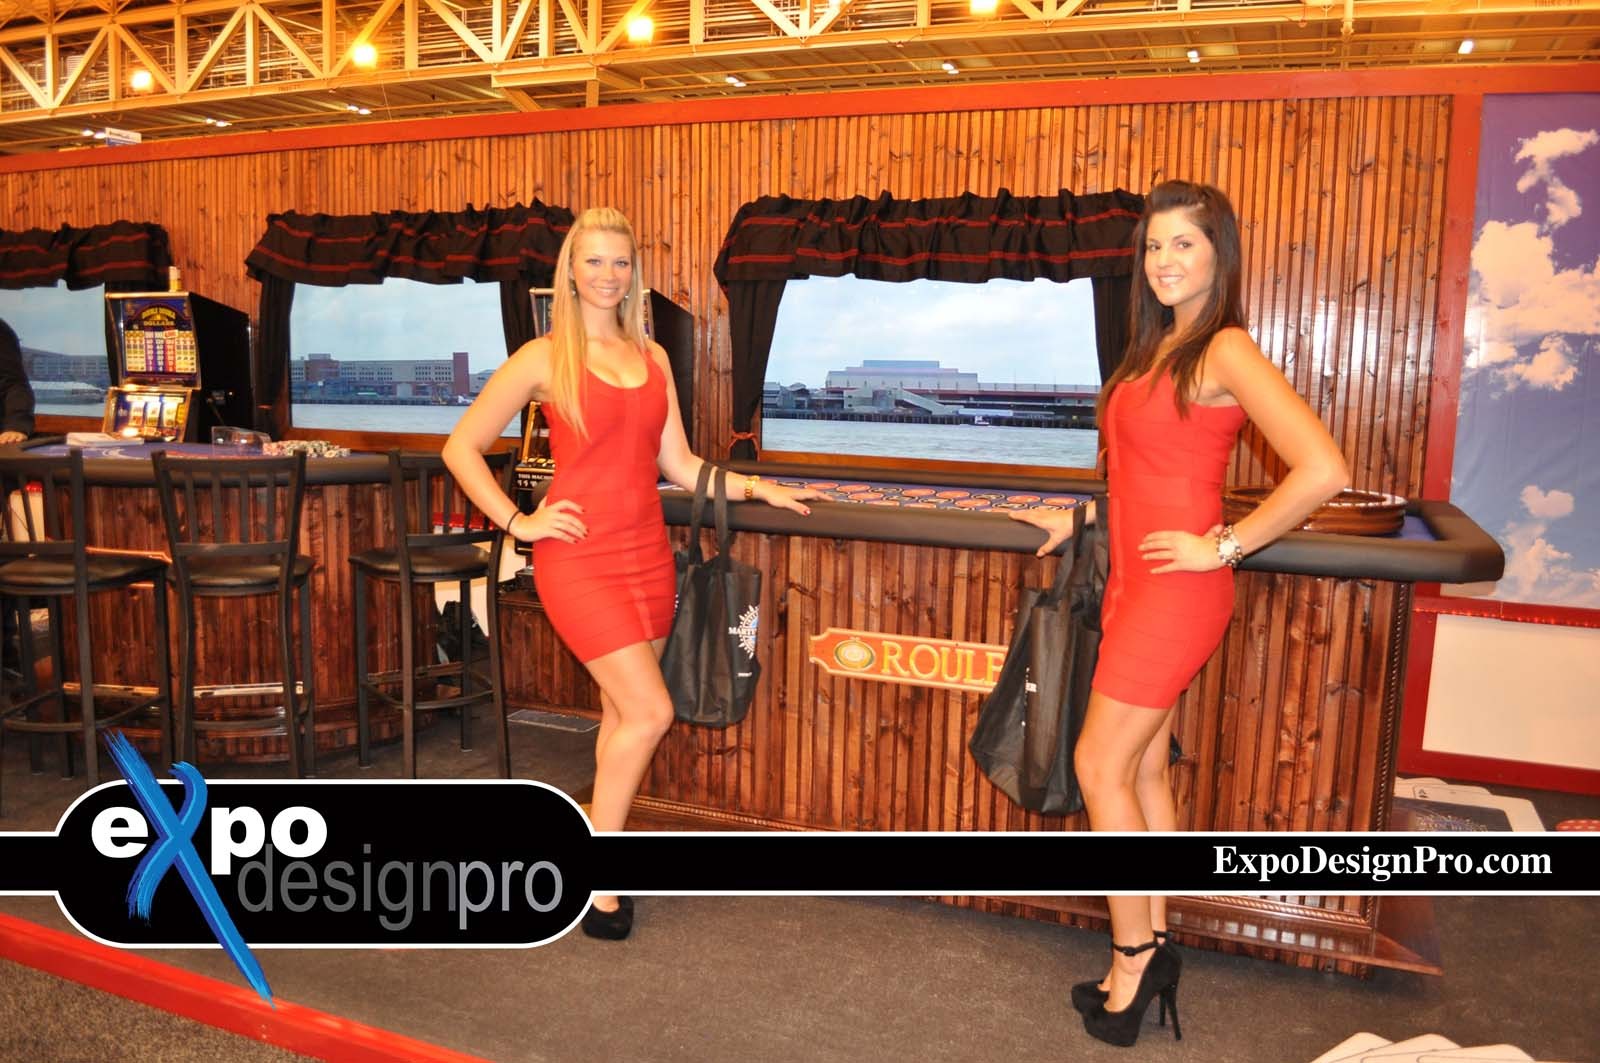 Do you need a river boat casino or casino theme for your next trade show booth? We can help.